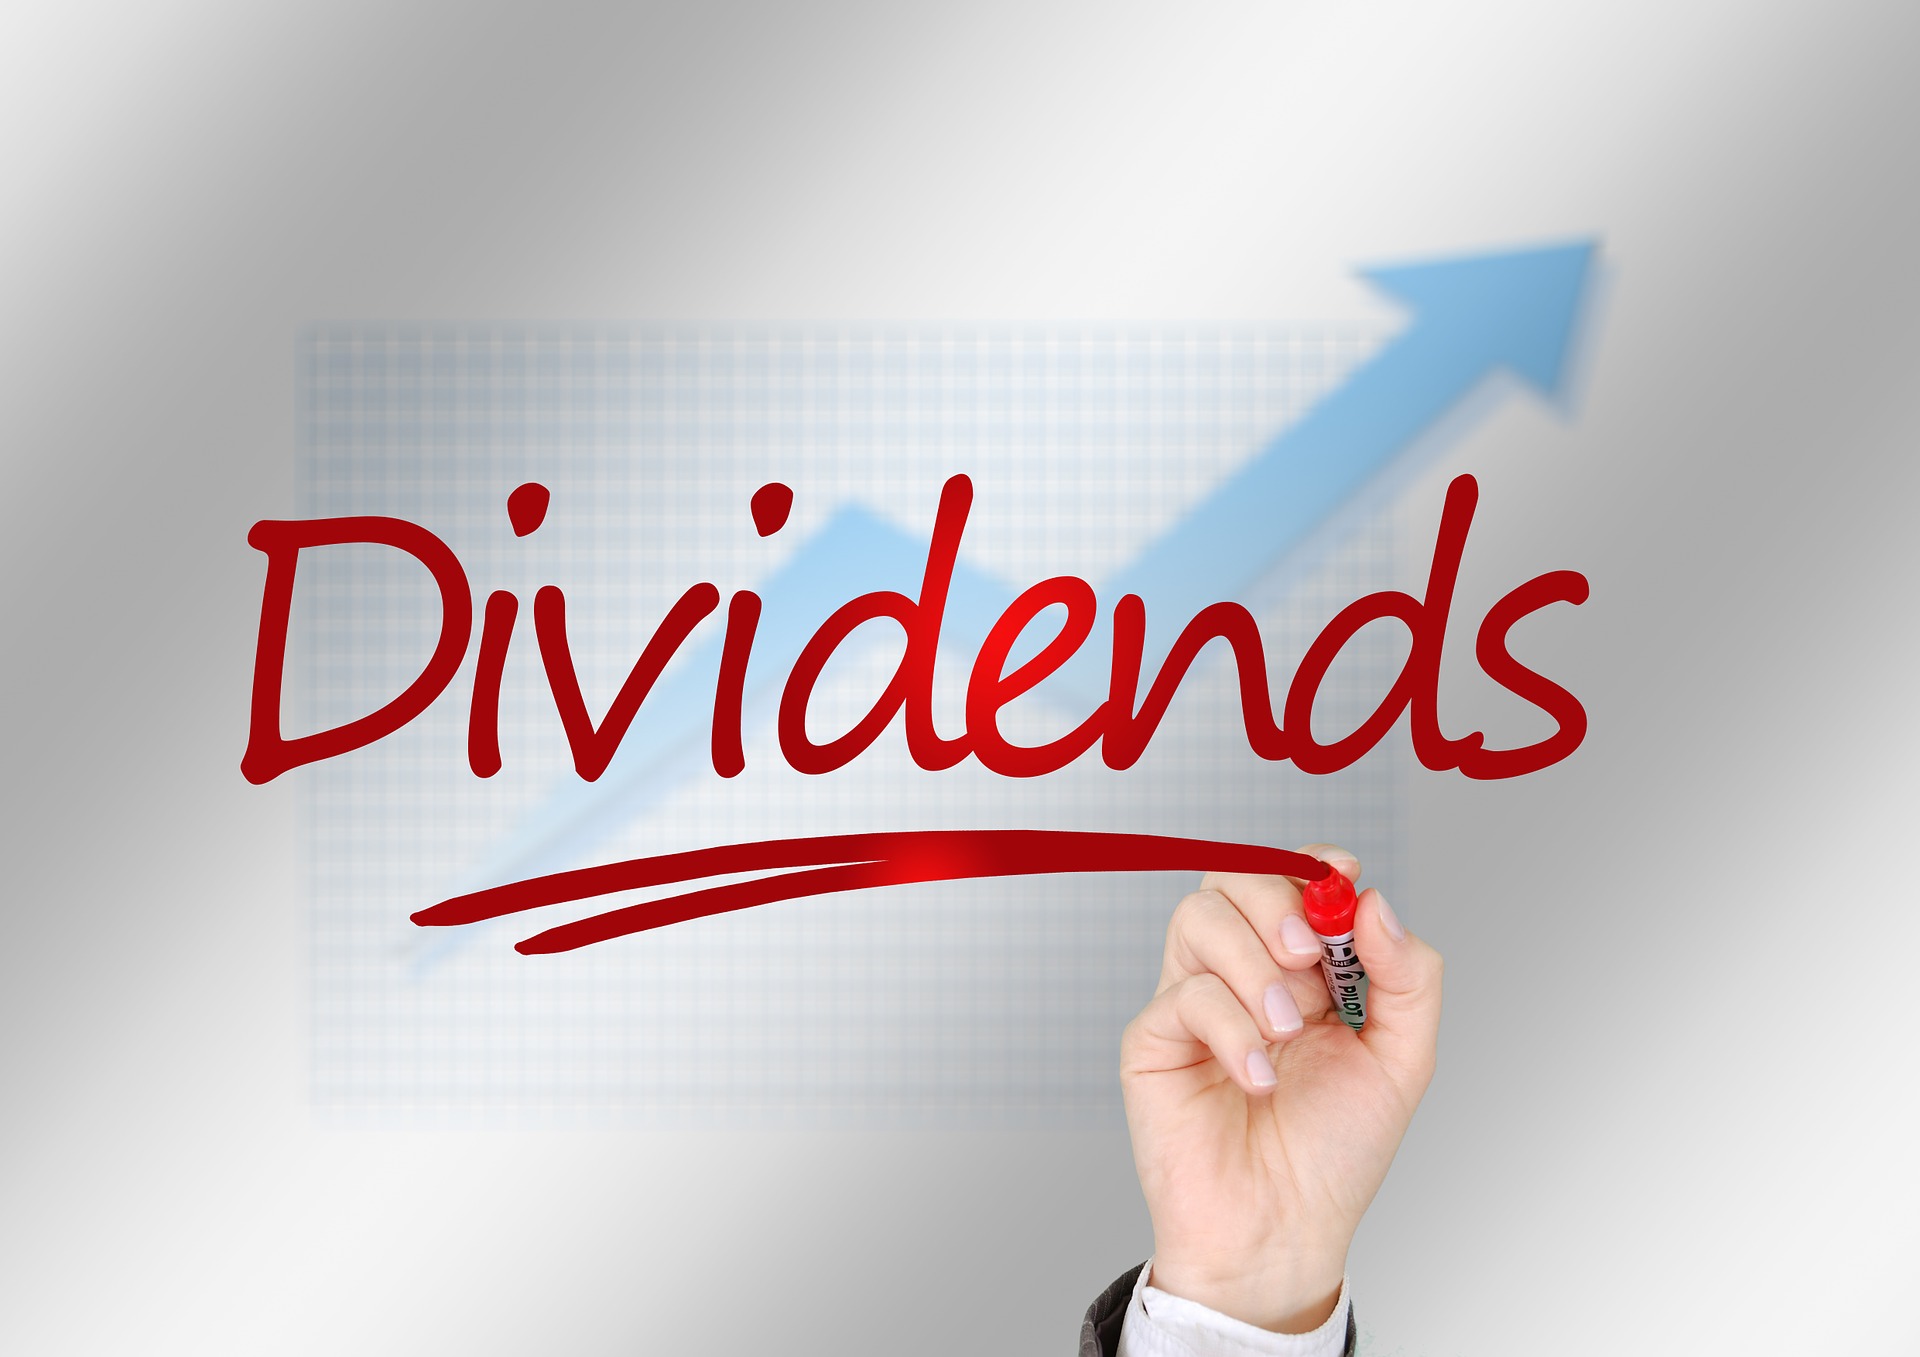 Guide to company dividends